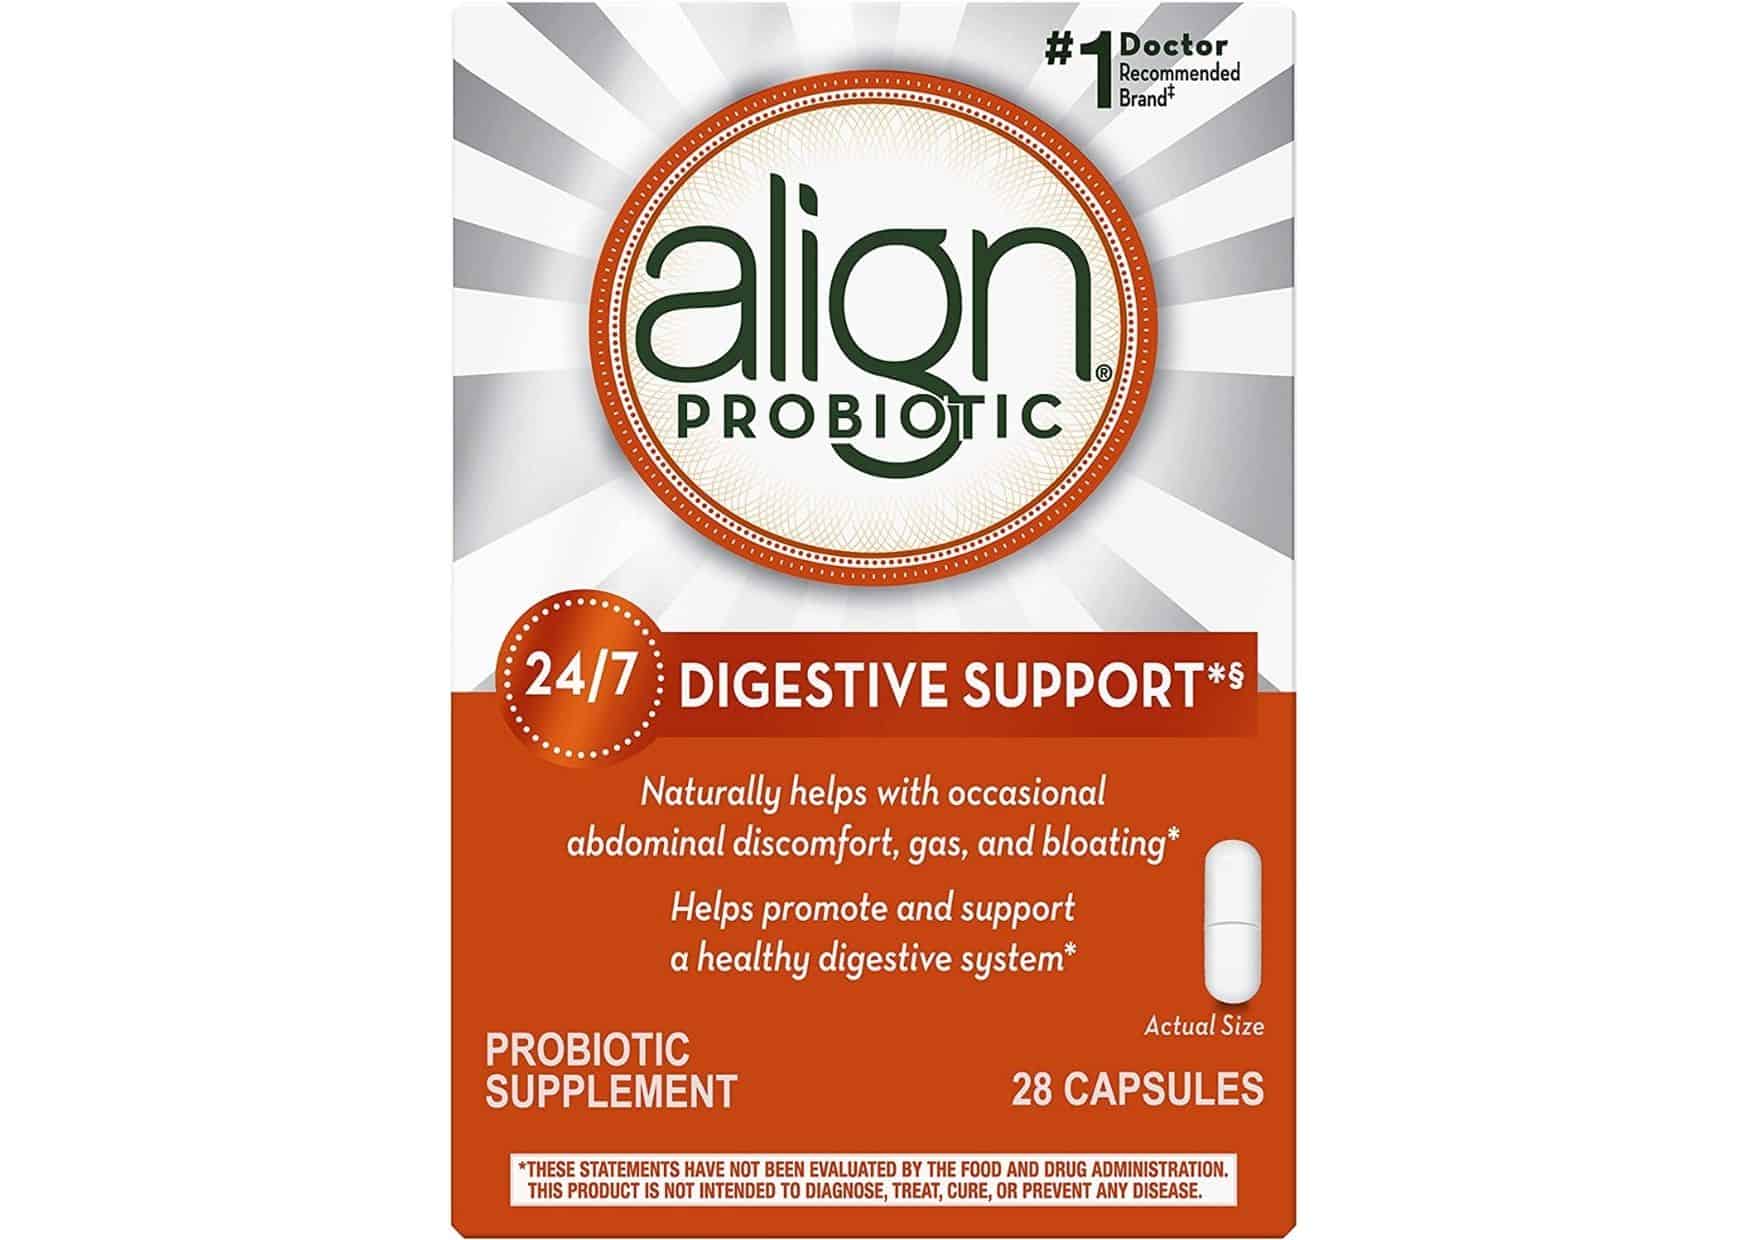 7 Best Probiotic Supplements (Recommendation and Reviews)